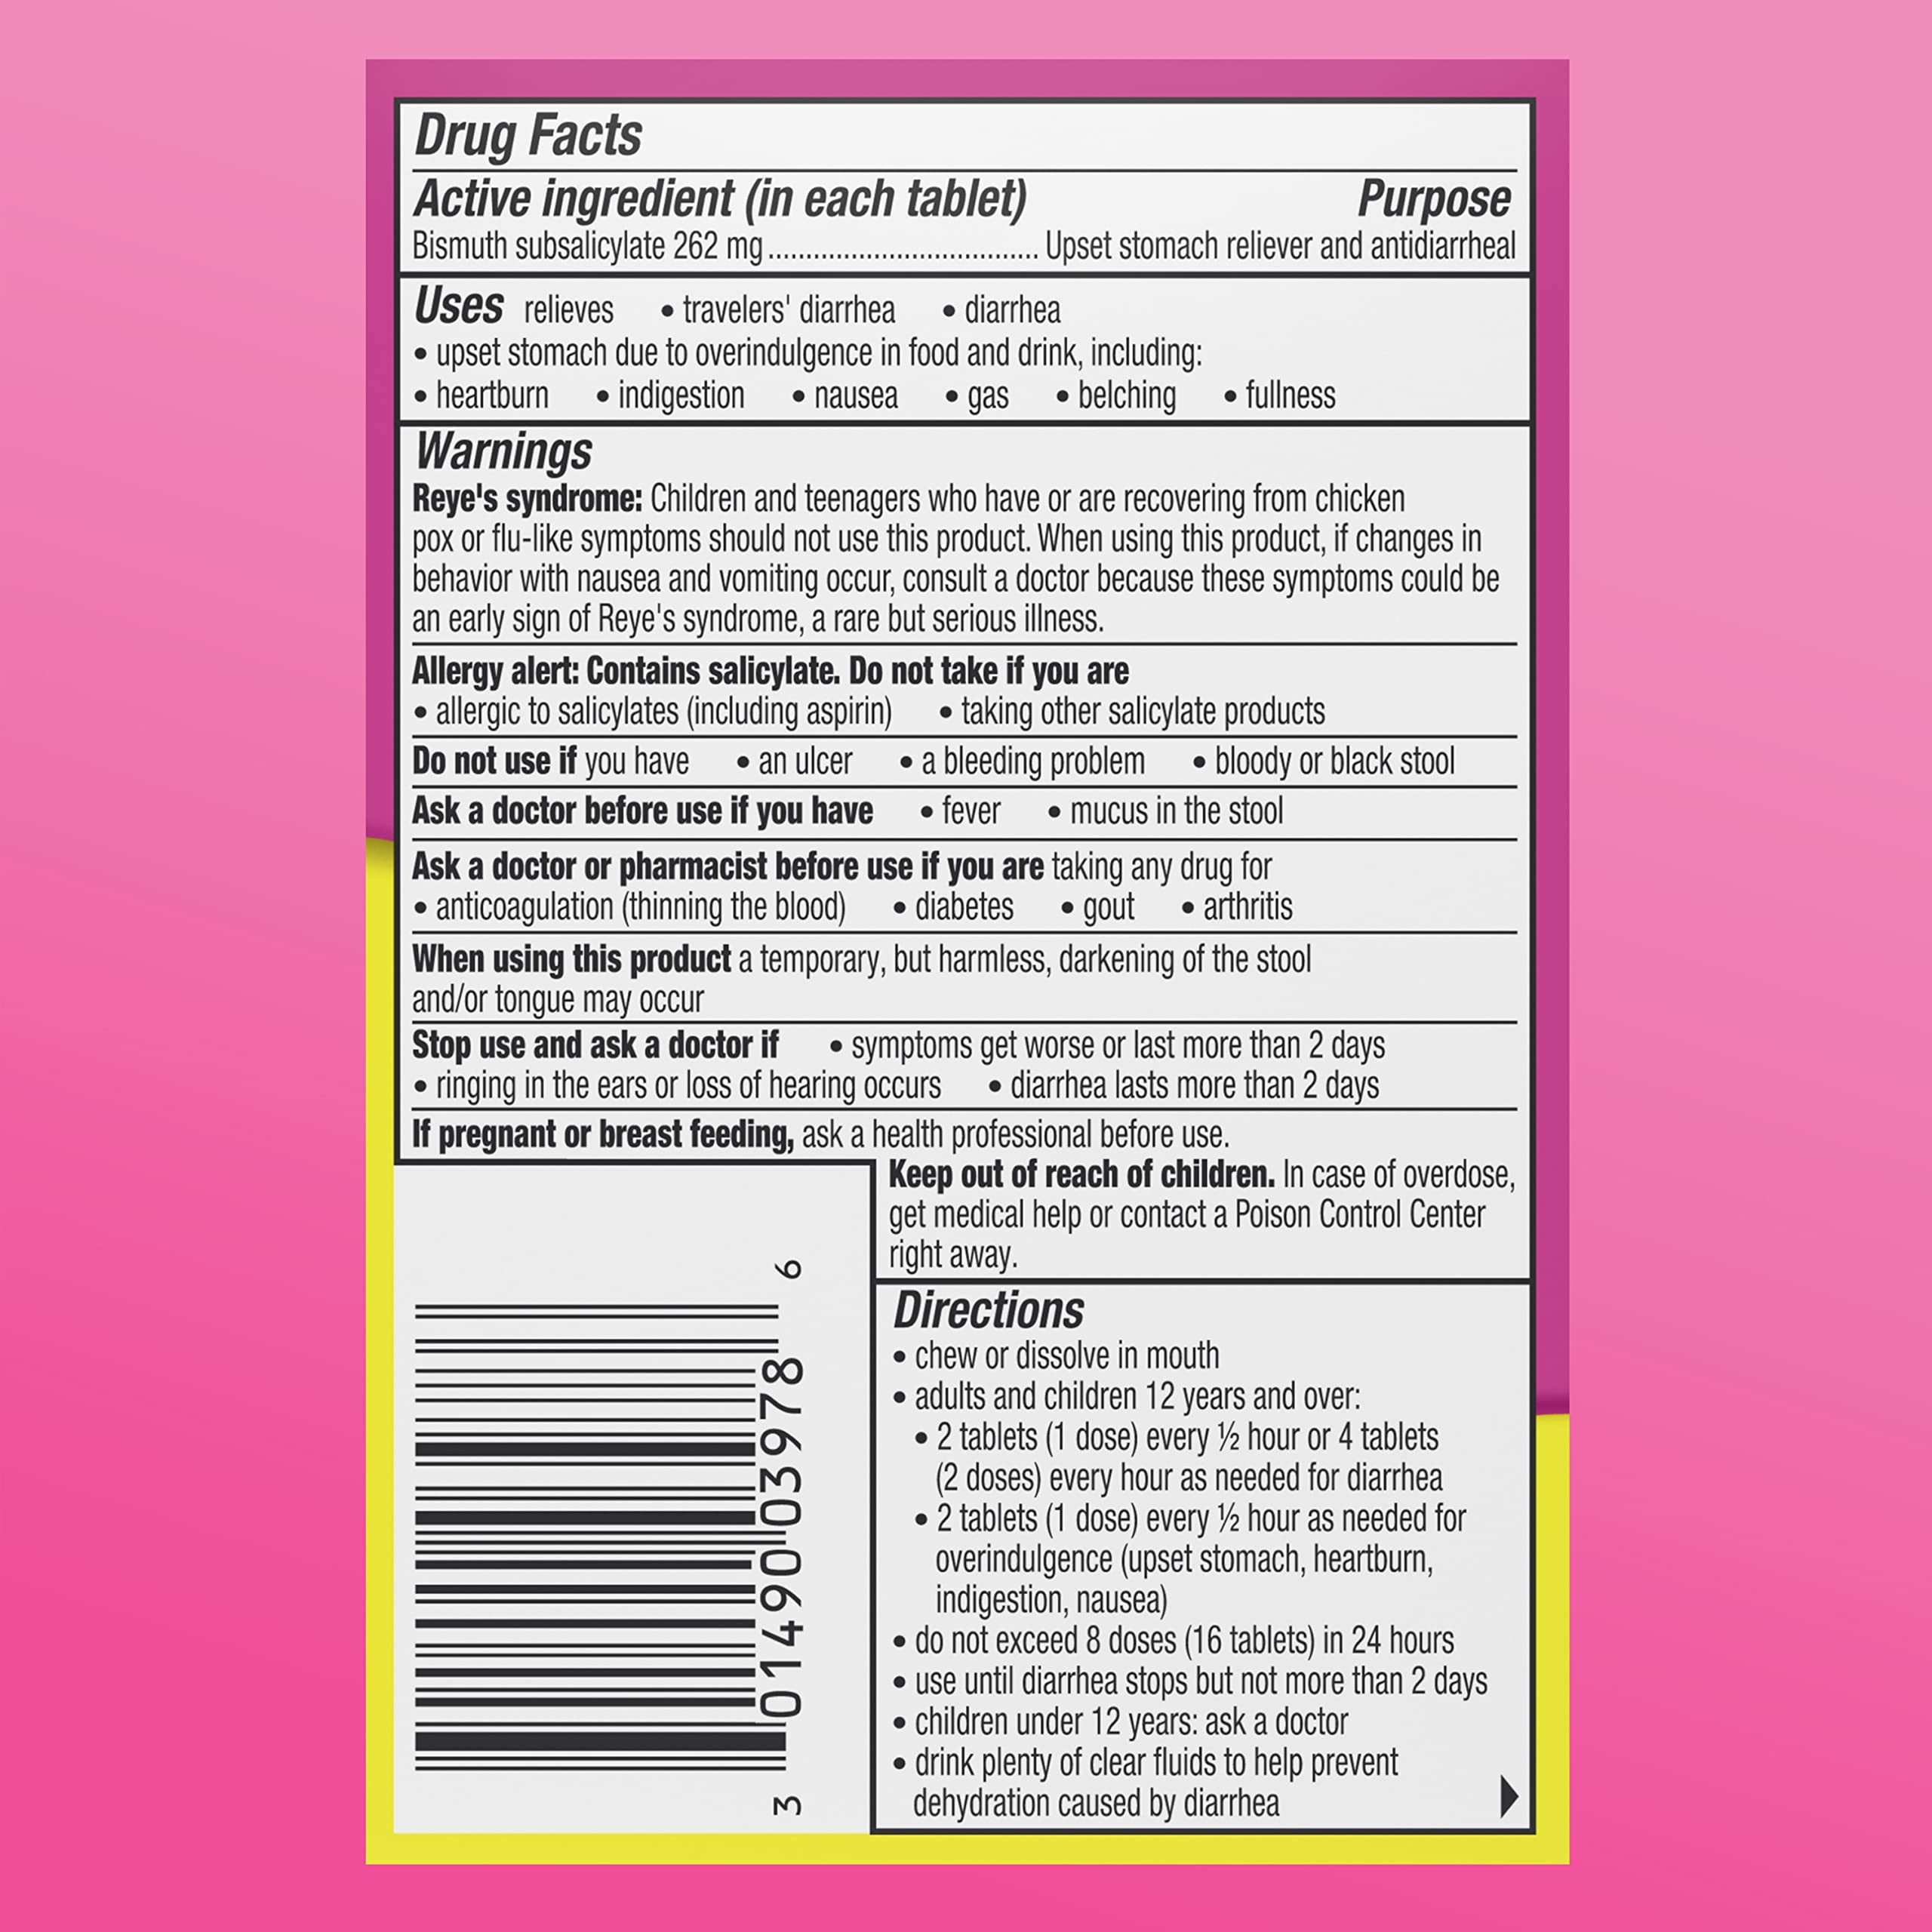 Pepto Bismol Chewables, Upset Stomach Relief, Bismuth Subsalicylate, Multi-Sympton Relief of Gas, Nausea, Heartburn, Indigestion, Diarrhea, Cherry Flavor, 30 Tablets